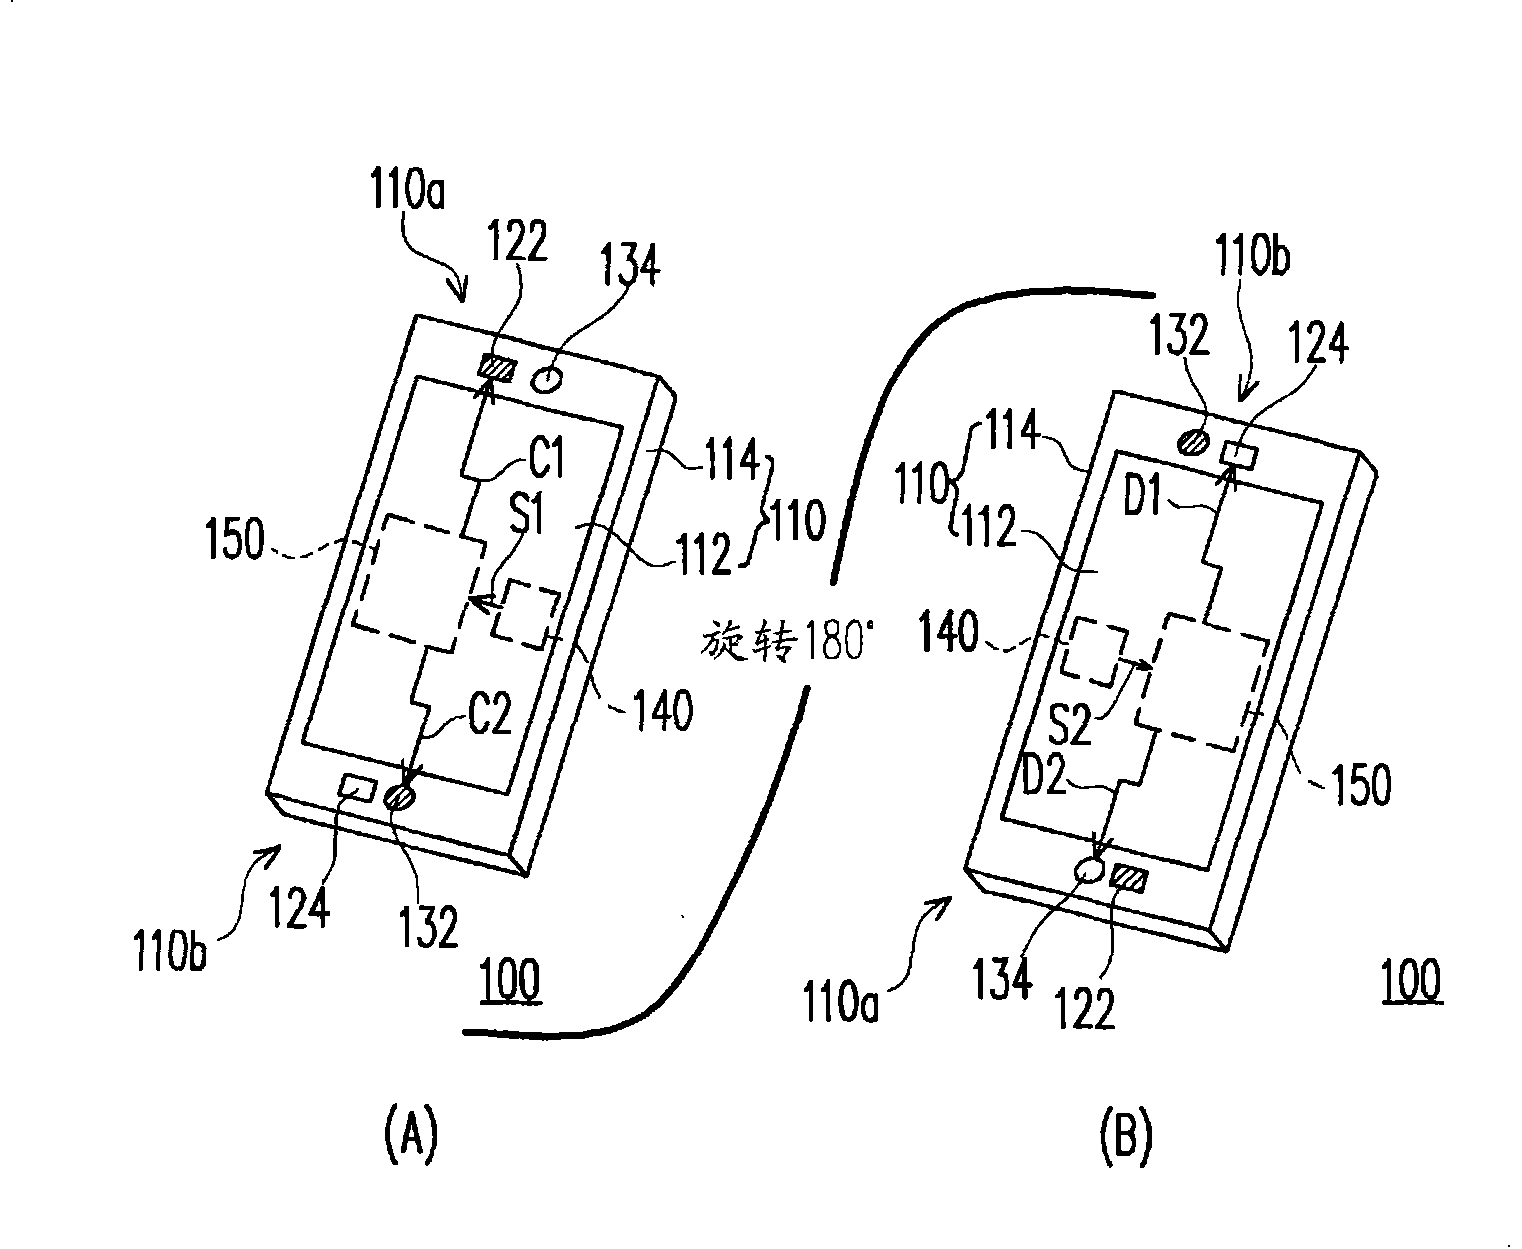 Hand-held electronic device and method for operating same